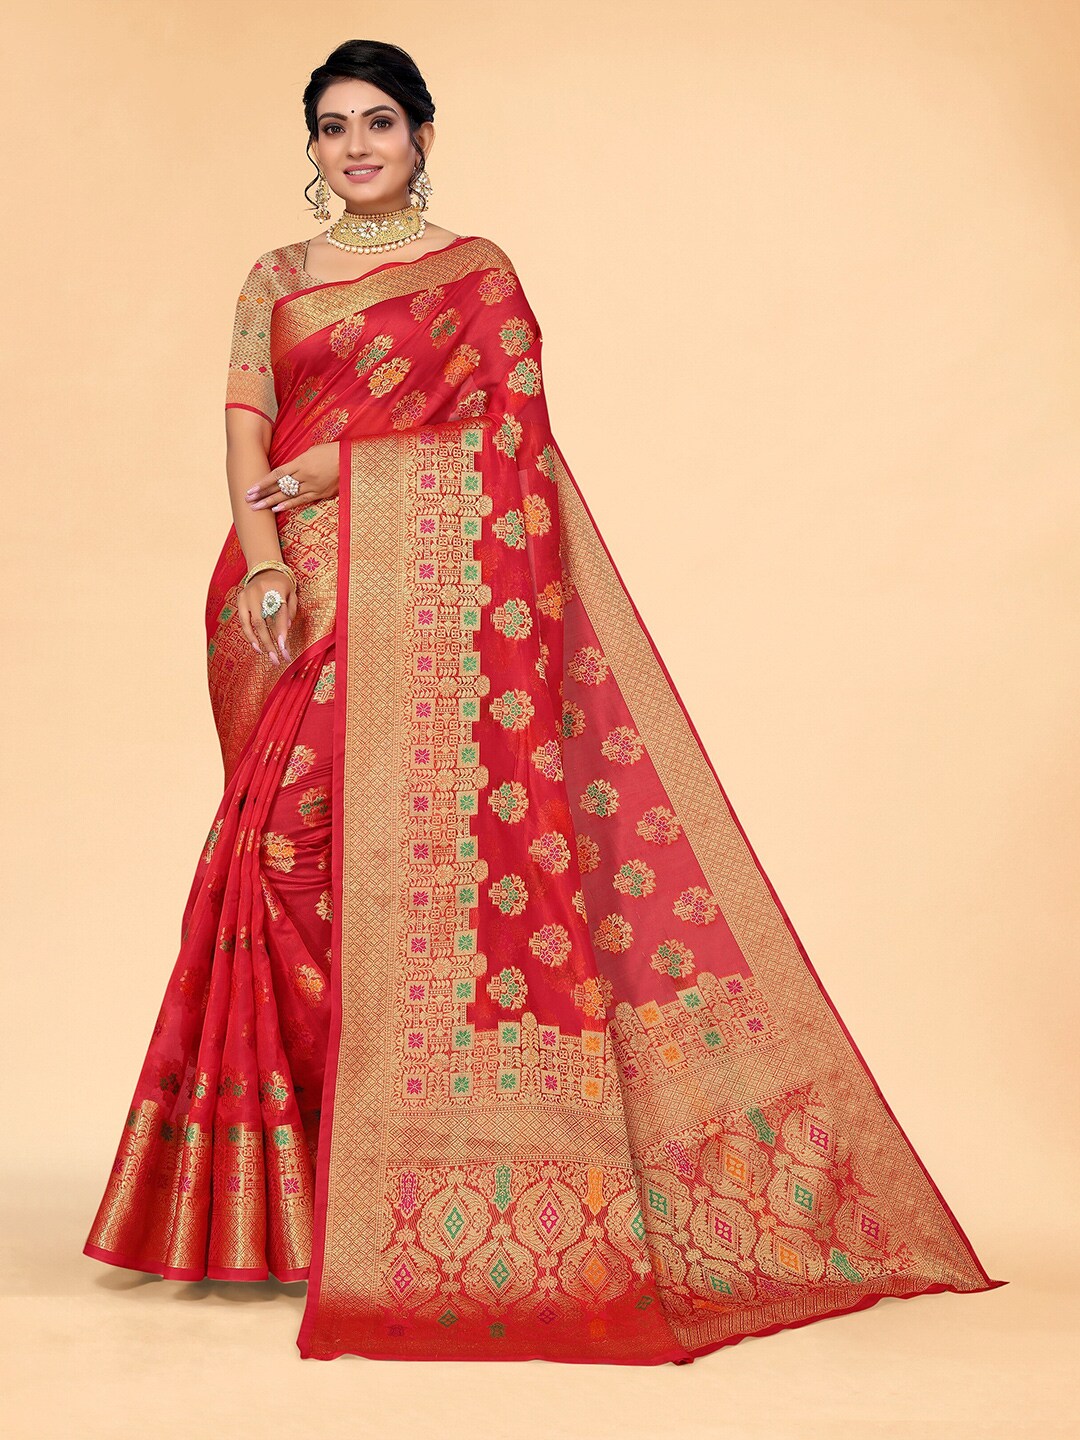 all about you Red & Gold-Toned Ethnic Motifs Organza Kanjeevaram Saree Price in India